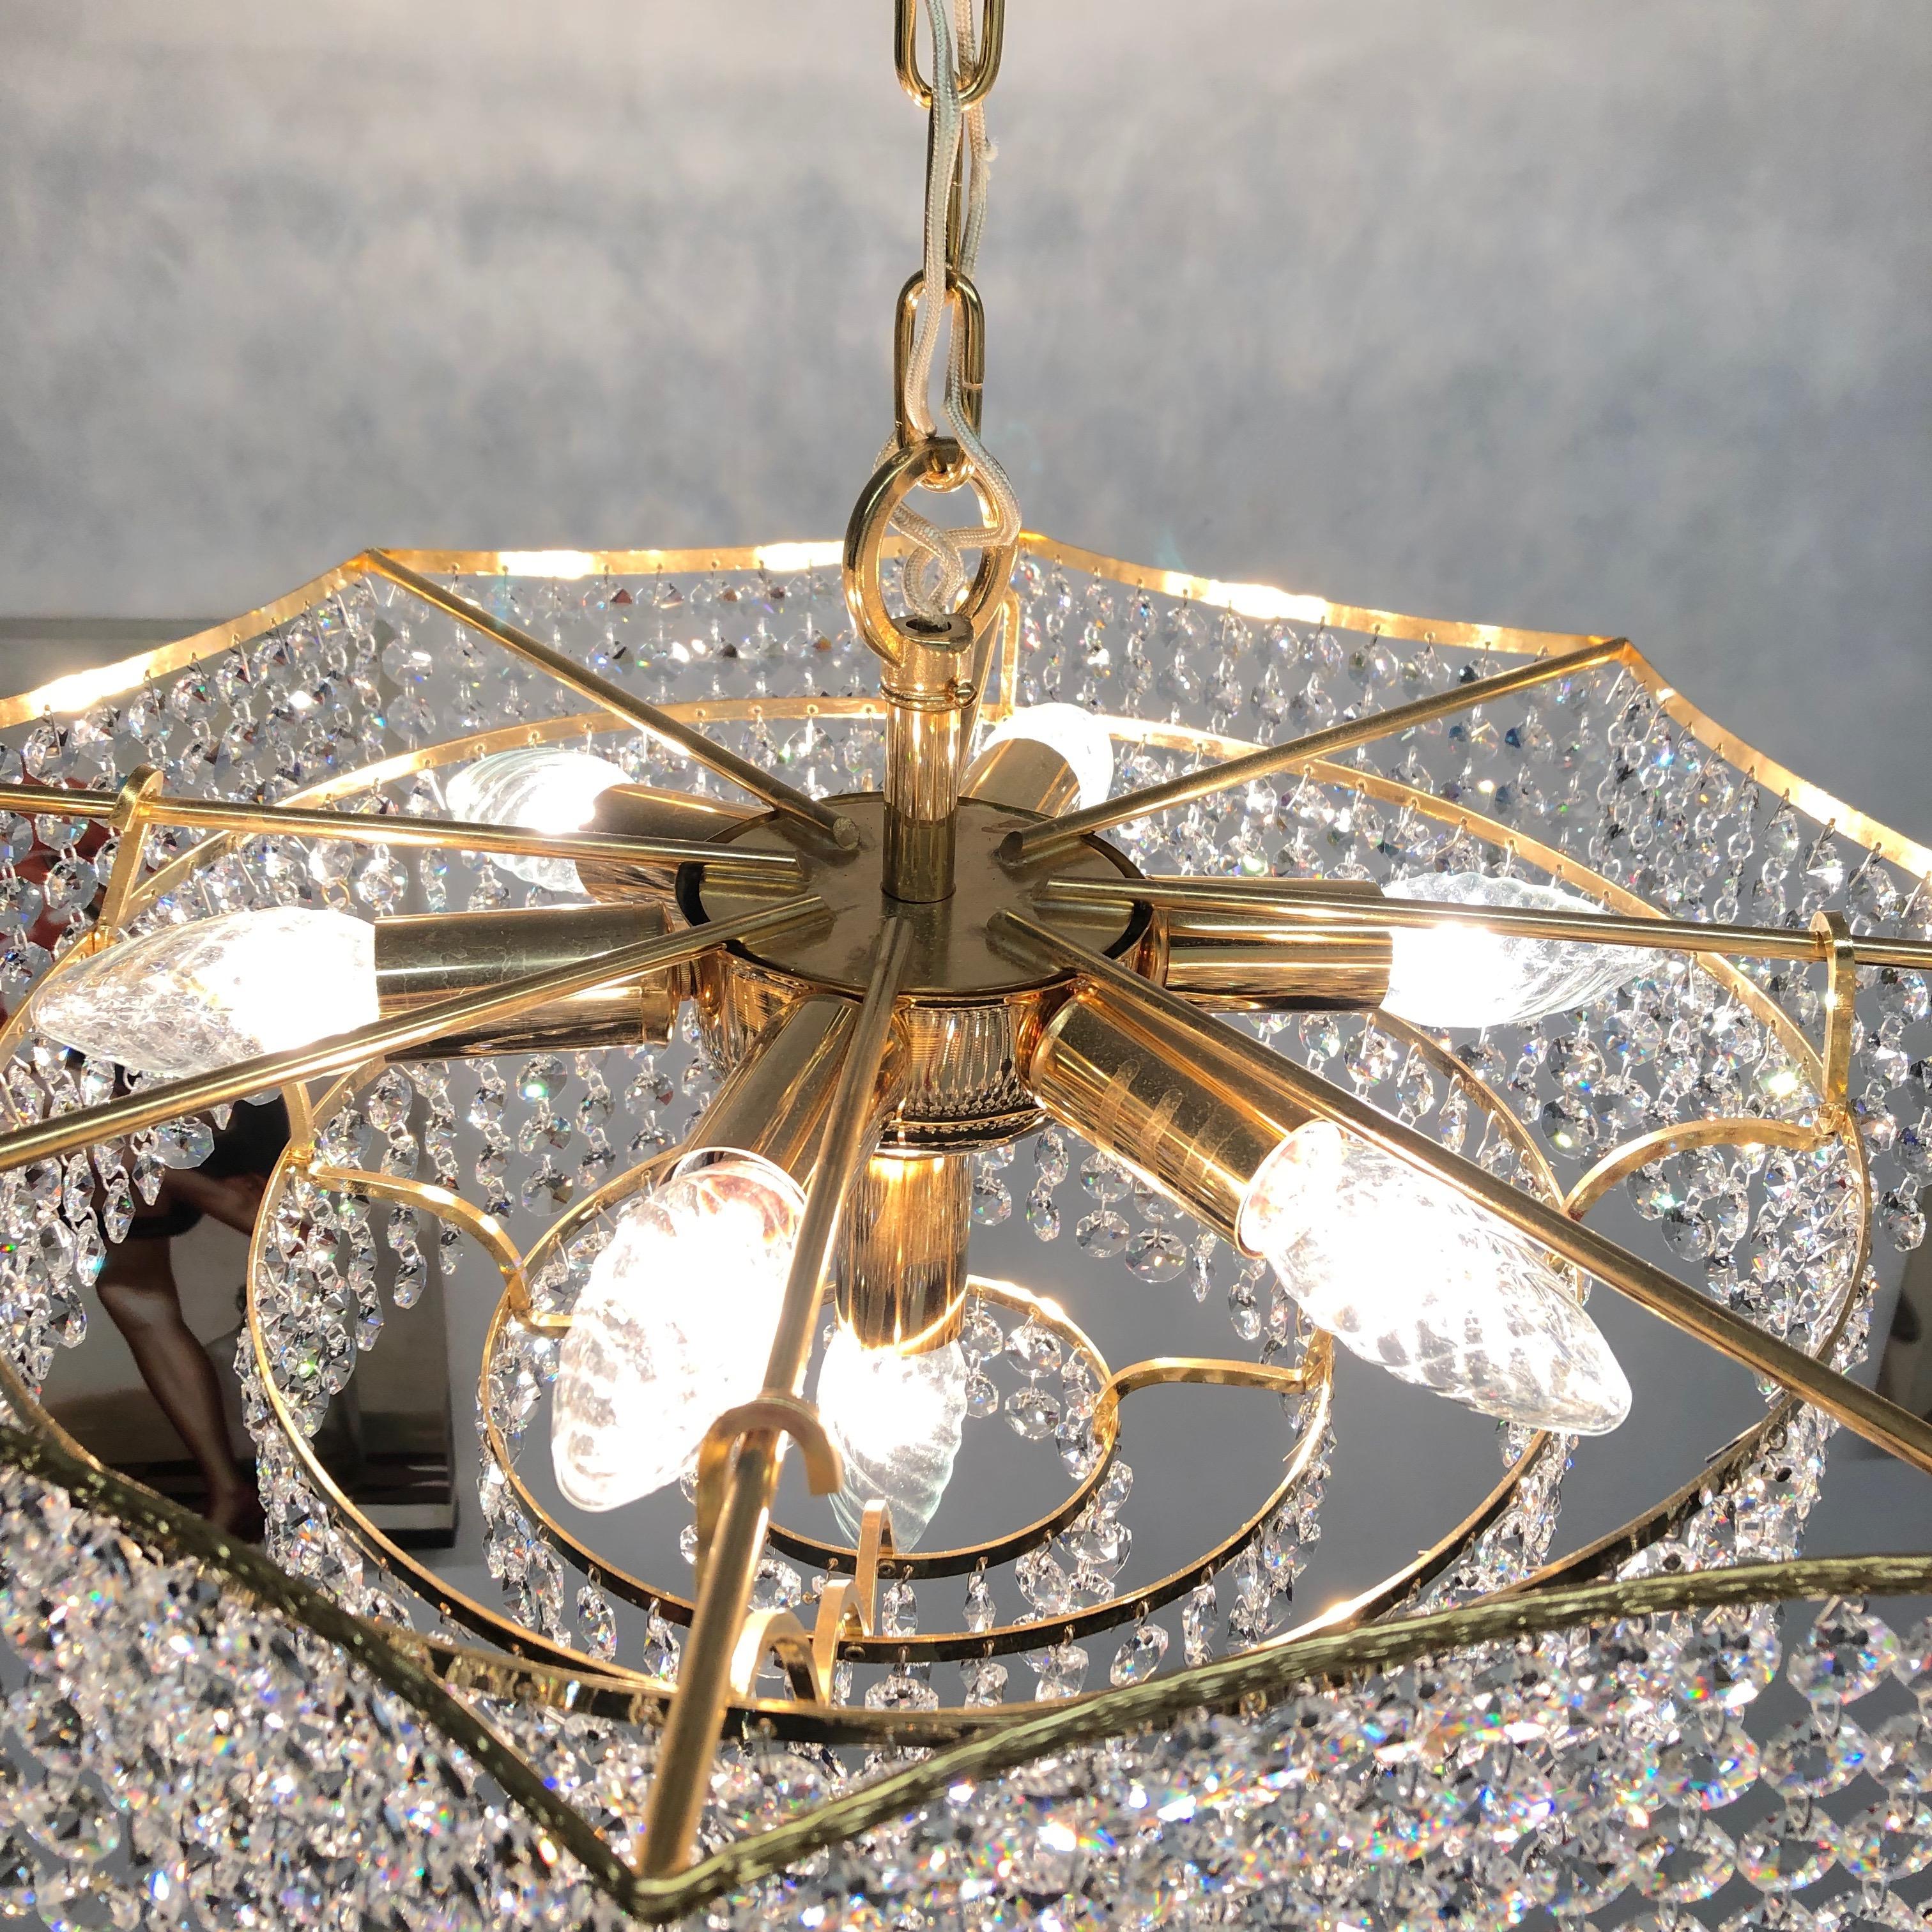 Brass and Crystal Glass Waterfall Chandelier, Richard Essig, Germany, 1960s For Sale 12